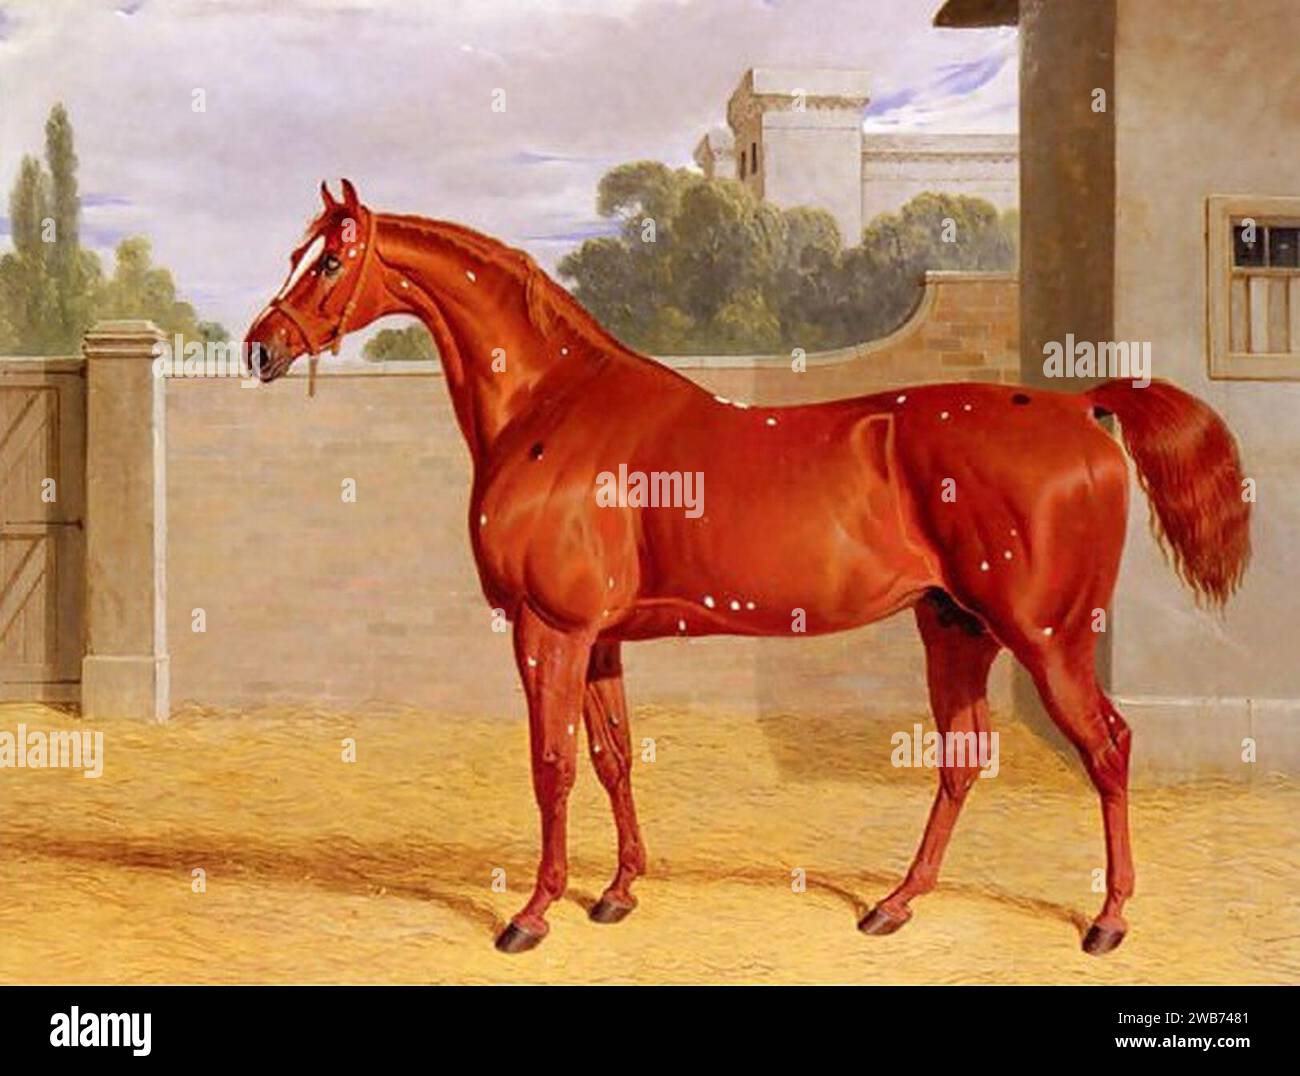 ''Comus'' A Chestnut Racehorse in a Stable Yard. Stock Photo